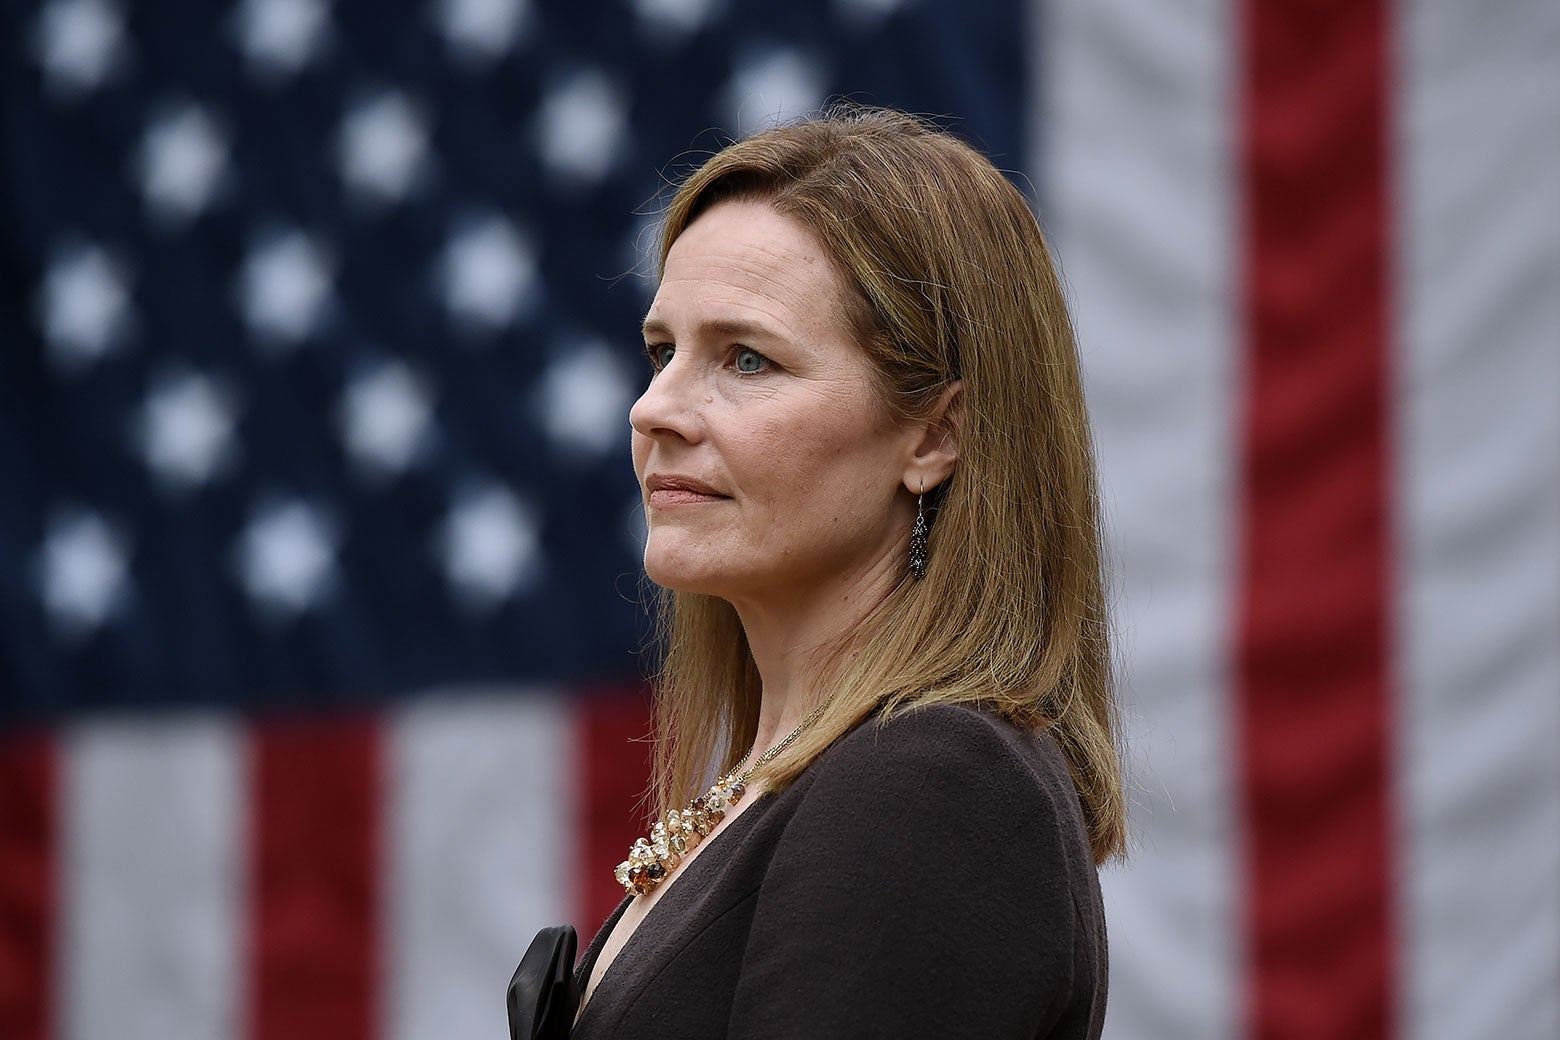 Amy Coney Barrett in front of a U.S. flag